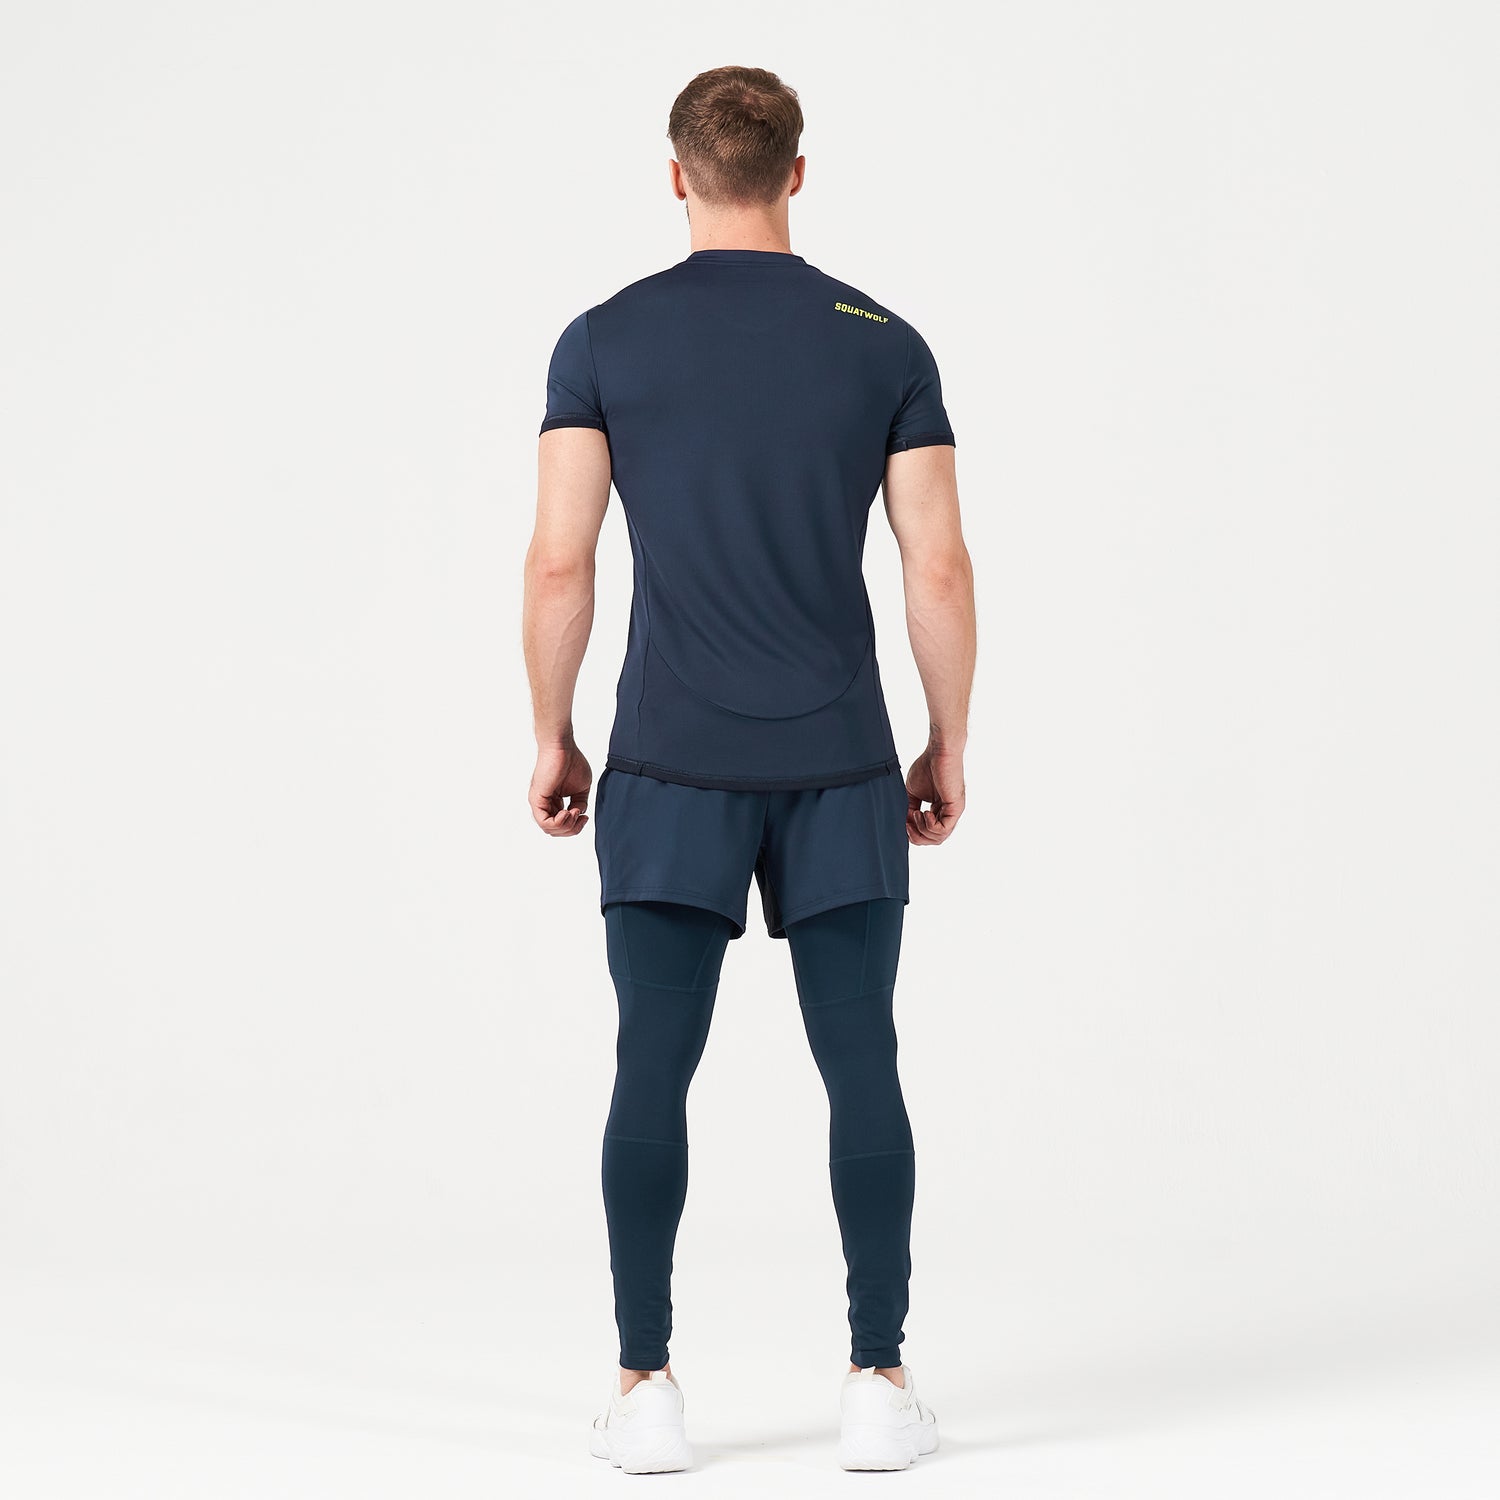 squatwolf-gym-wear-lab360-tdry-tee-navy-workout-shirts-for-men